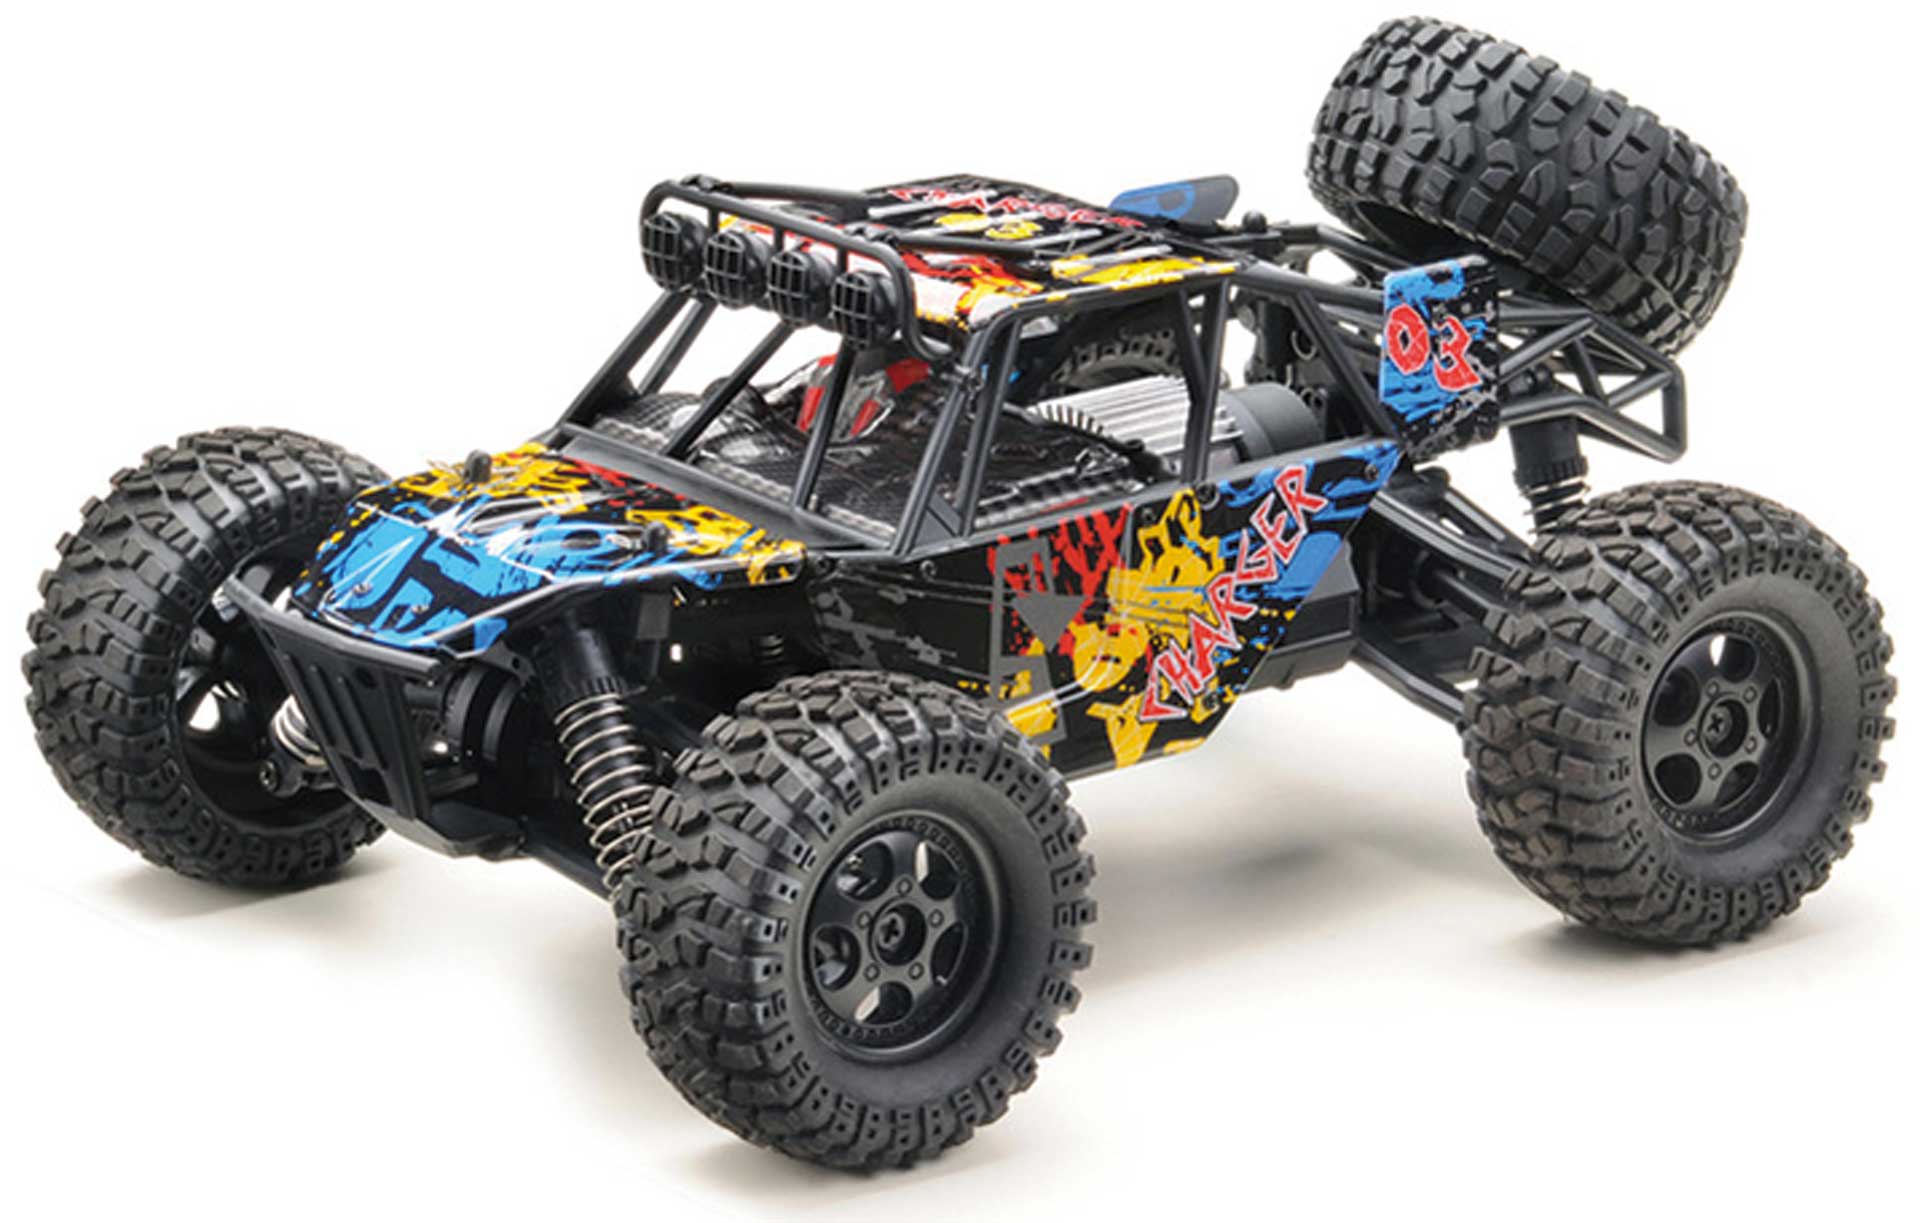 ABSIMA 1:14 High-Speed Sand Buggy "CHARGER" 4WD RTR